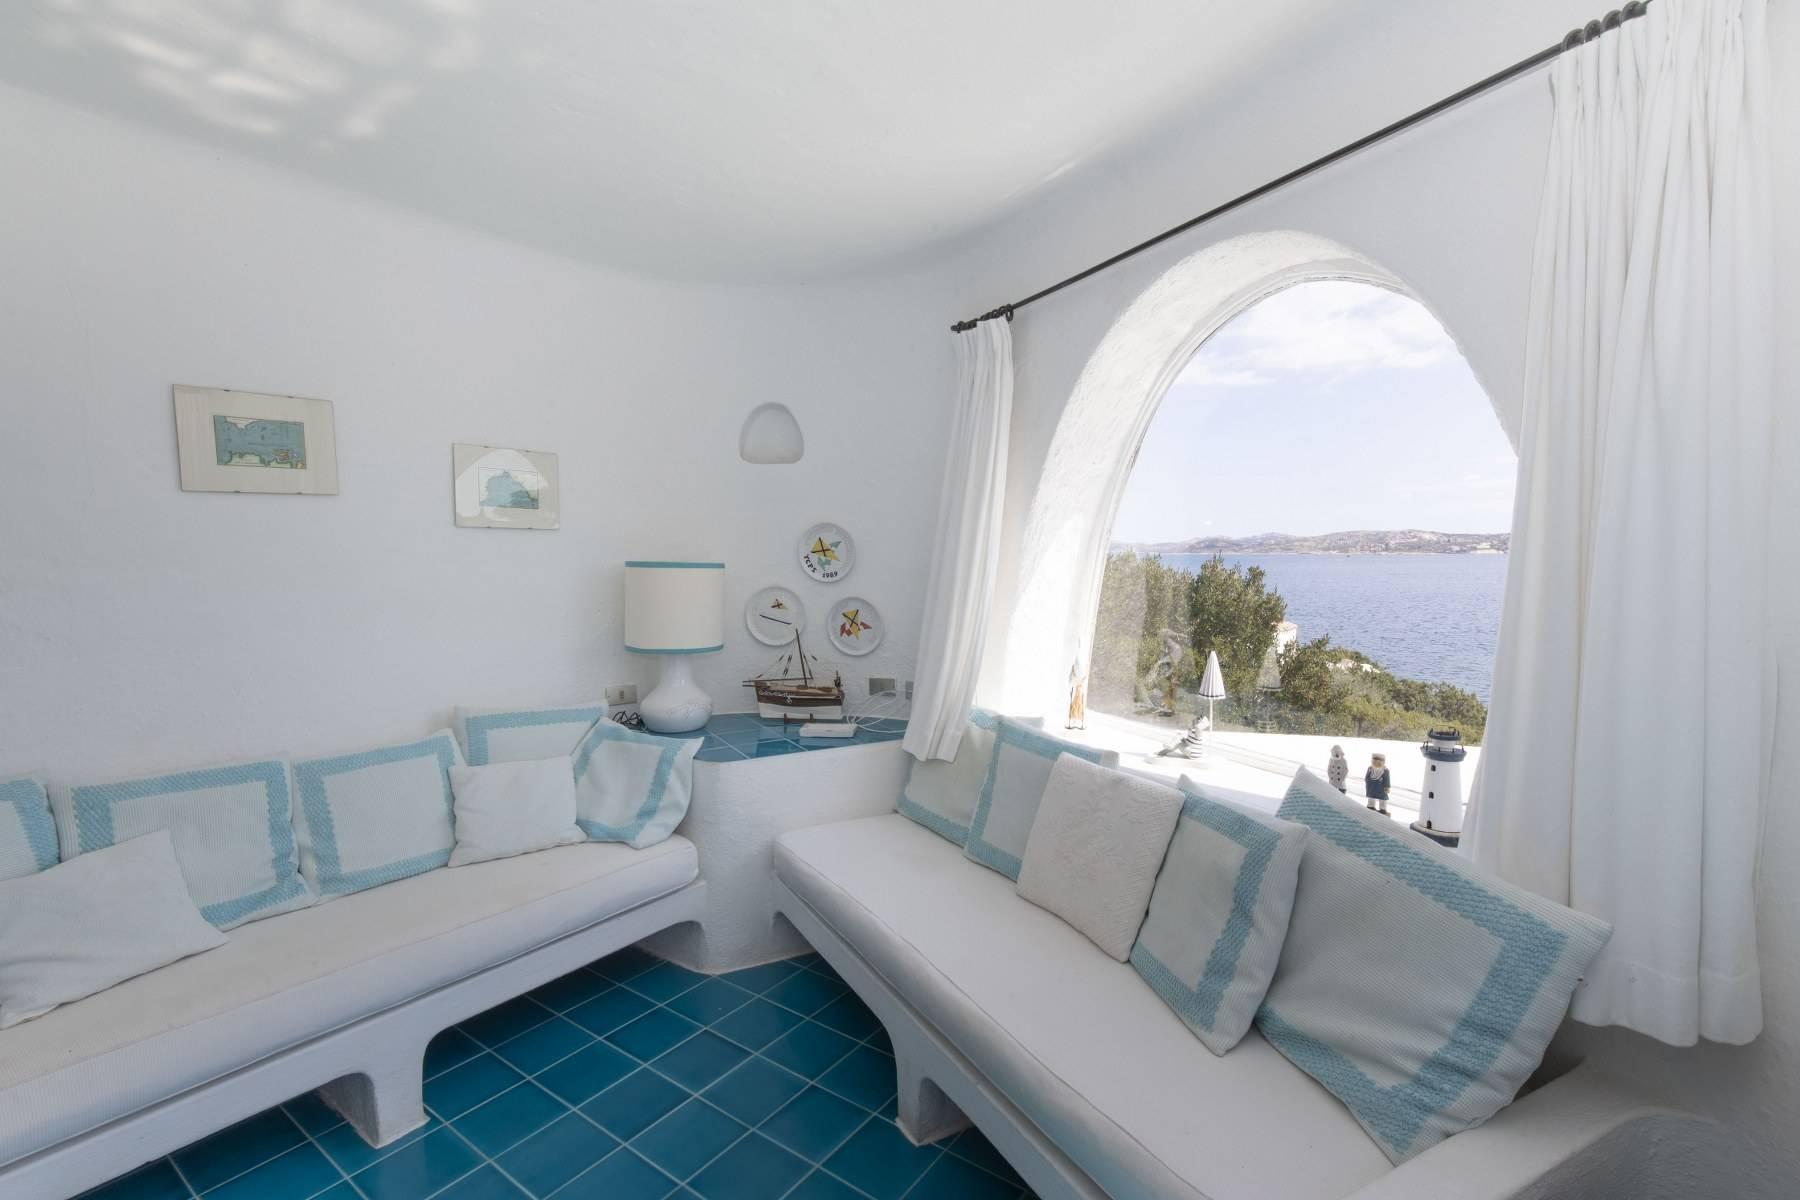 A charming nest for two, with a view towards the infinite sea - 13